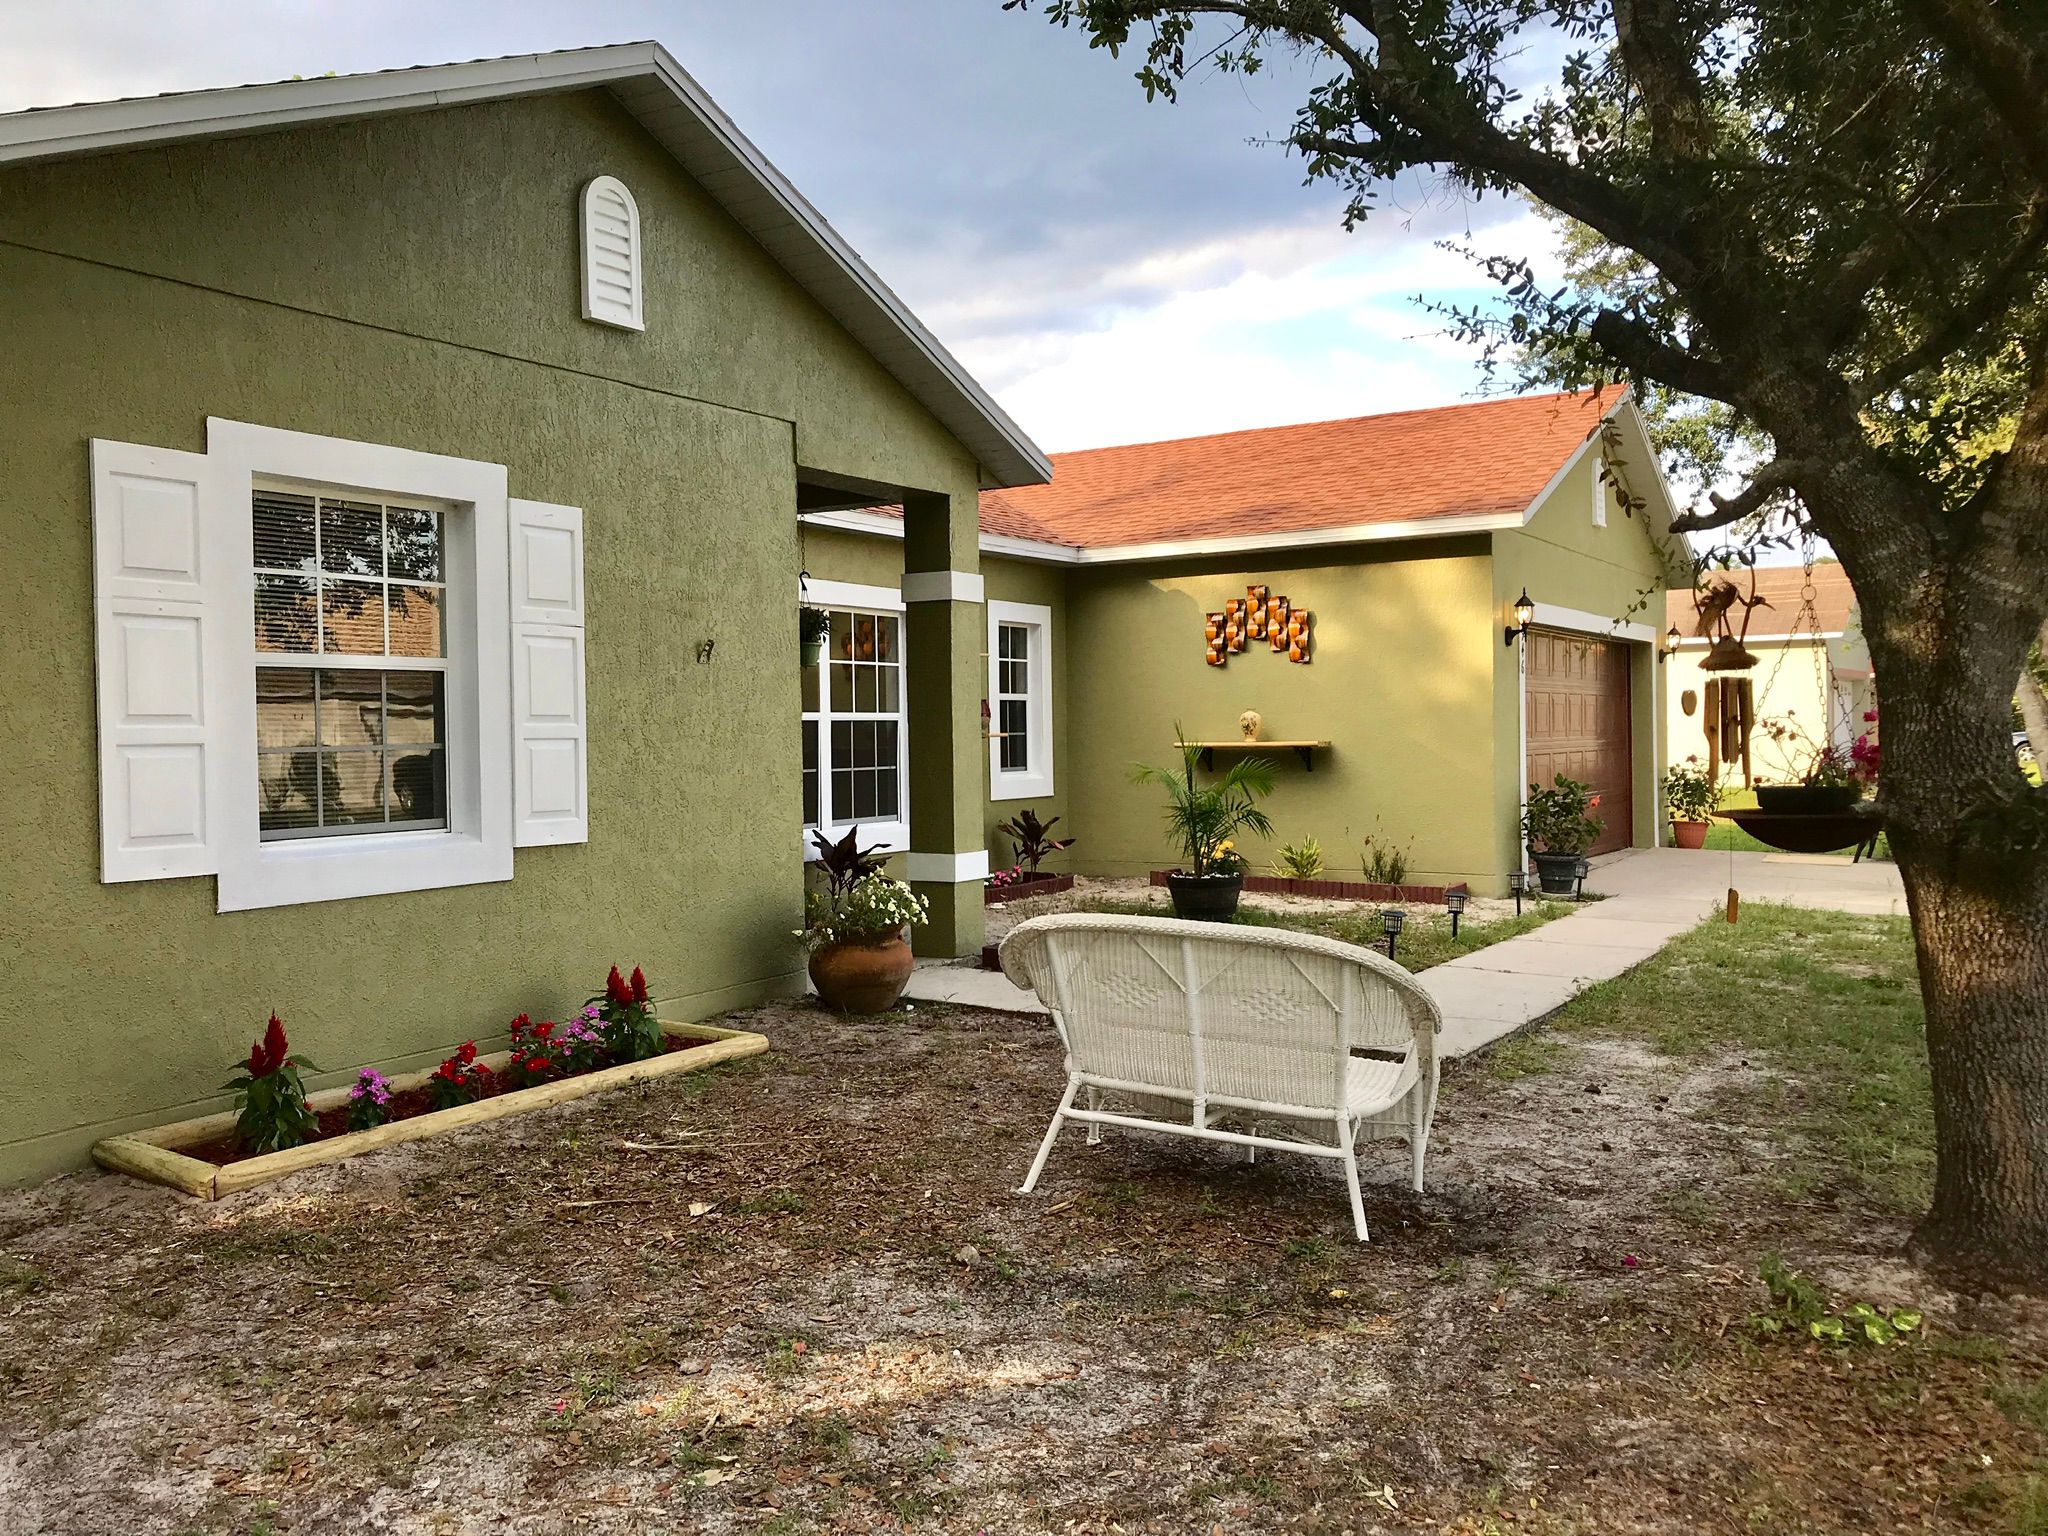 Louvre Ct Kissimmee Fl Bed Bath Single Family